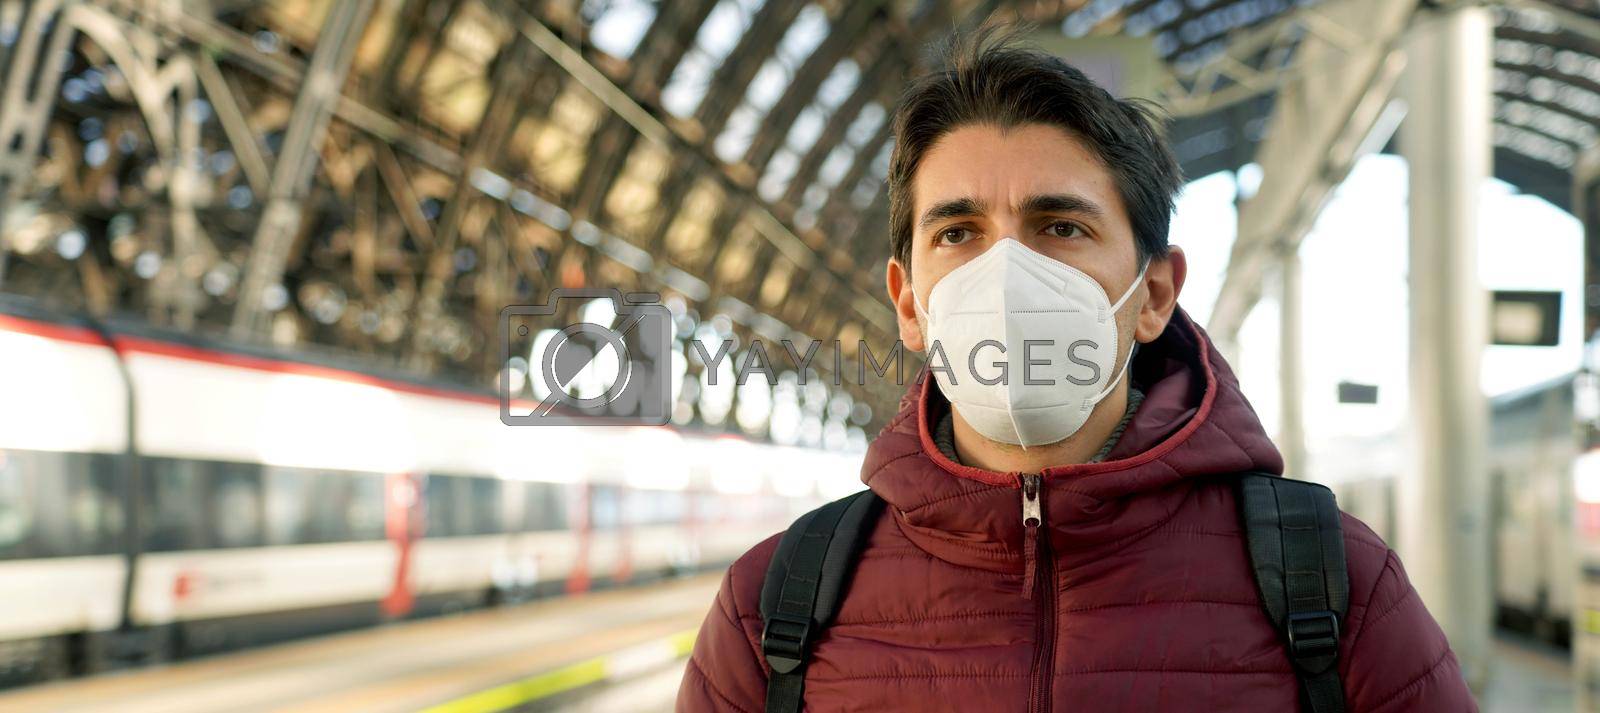 Royalty free image of Banner panorama of young traveler man wearing protective face mask at train station with copy space. Public transport and health concept. by sergio_monti